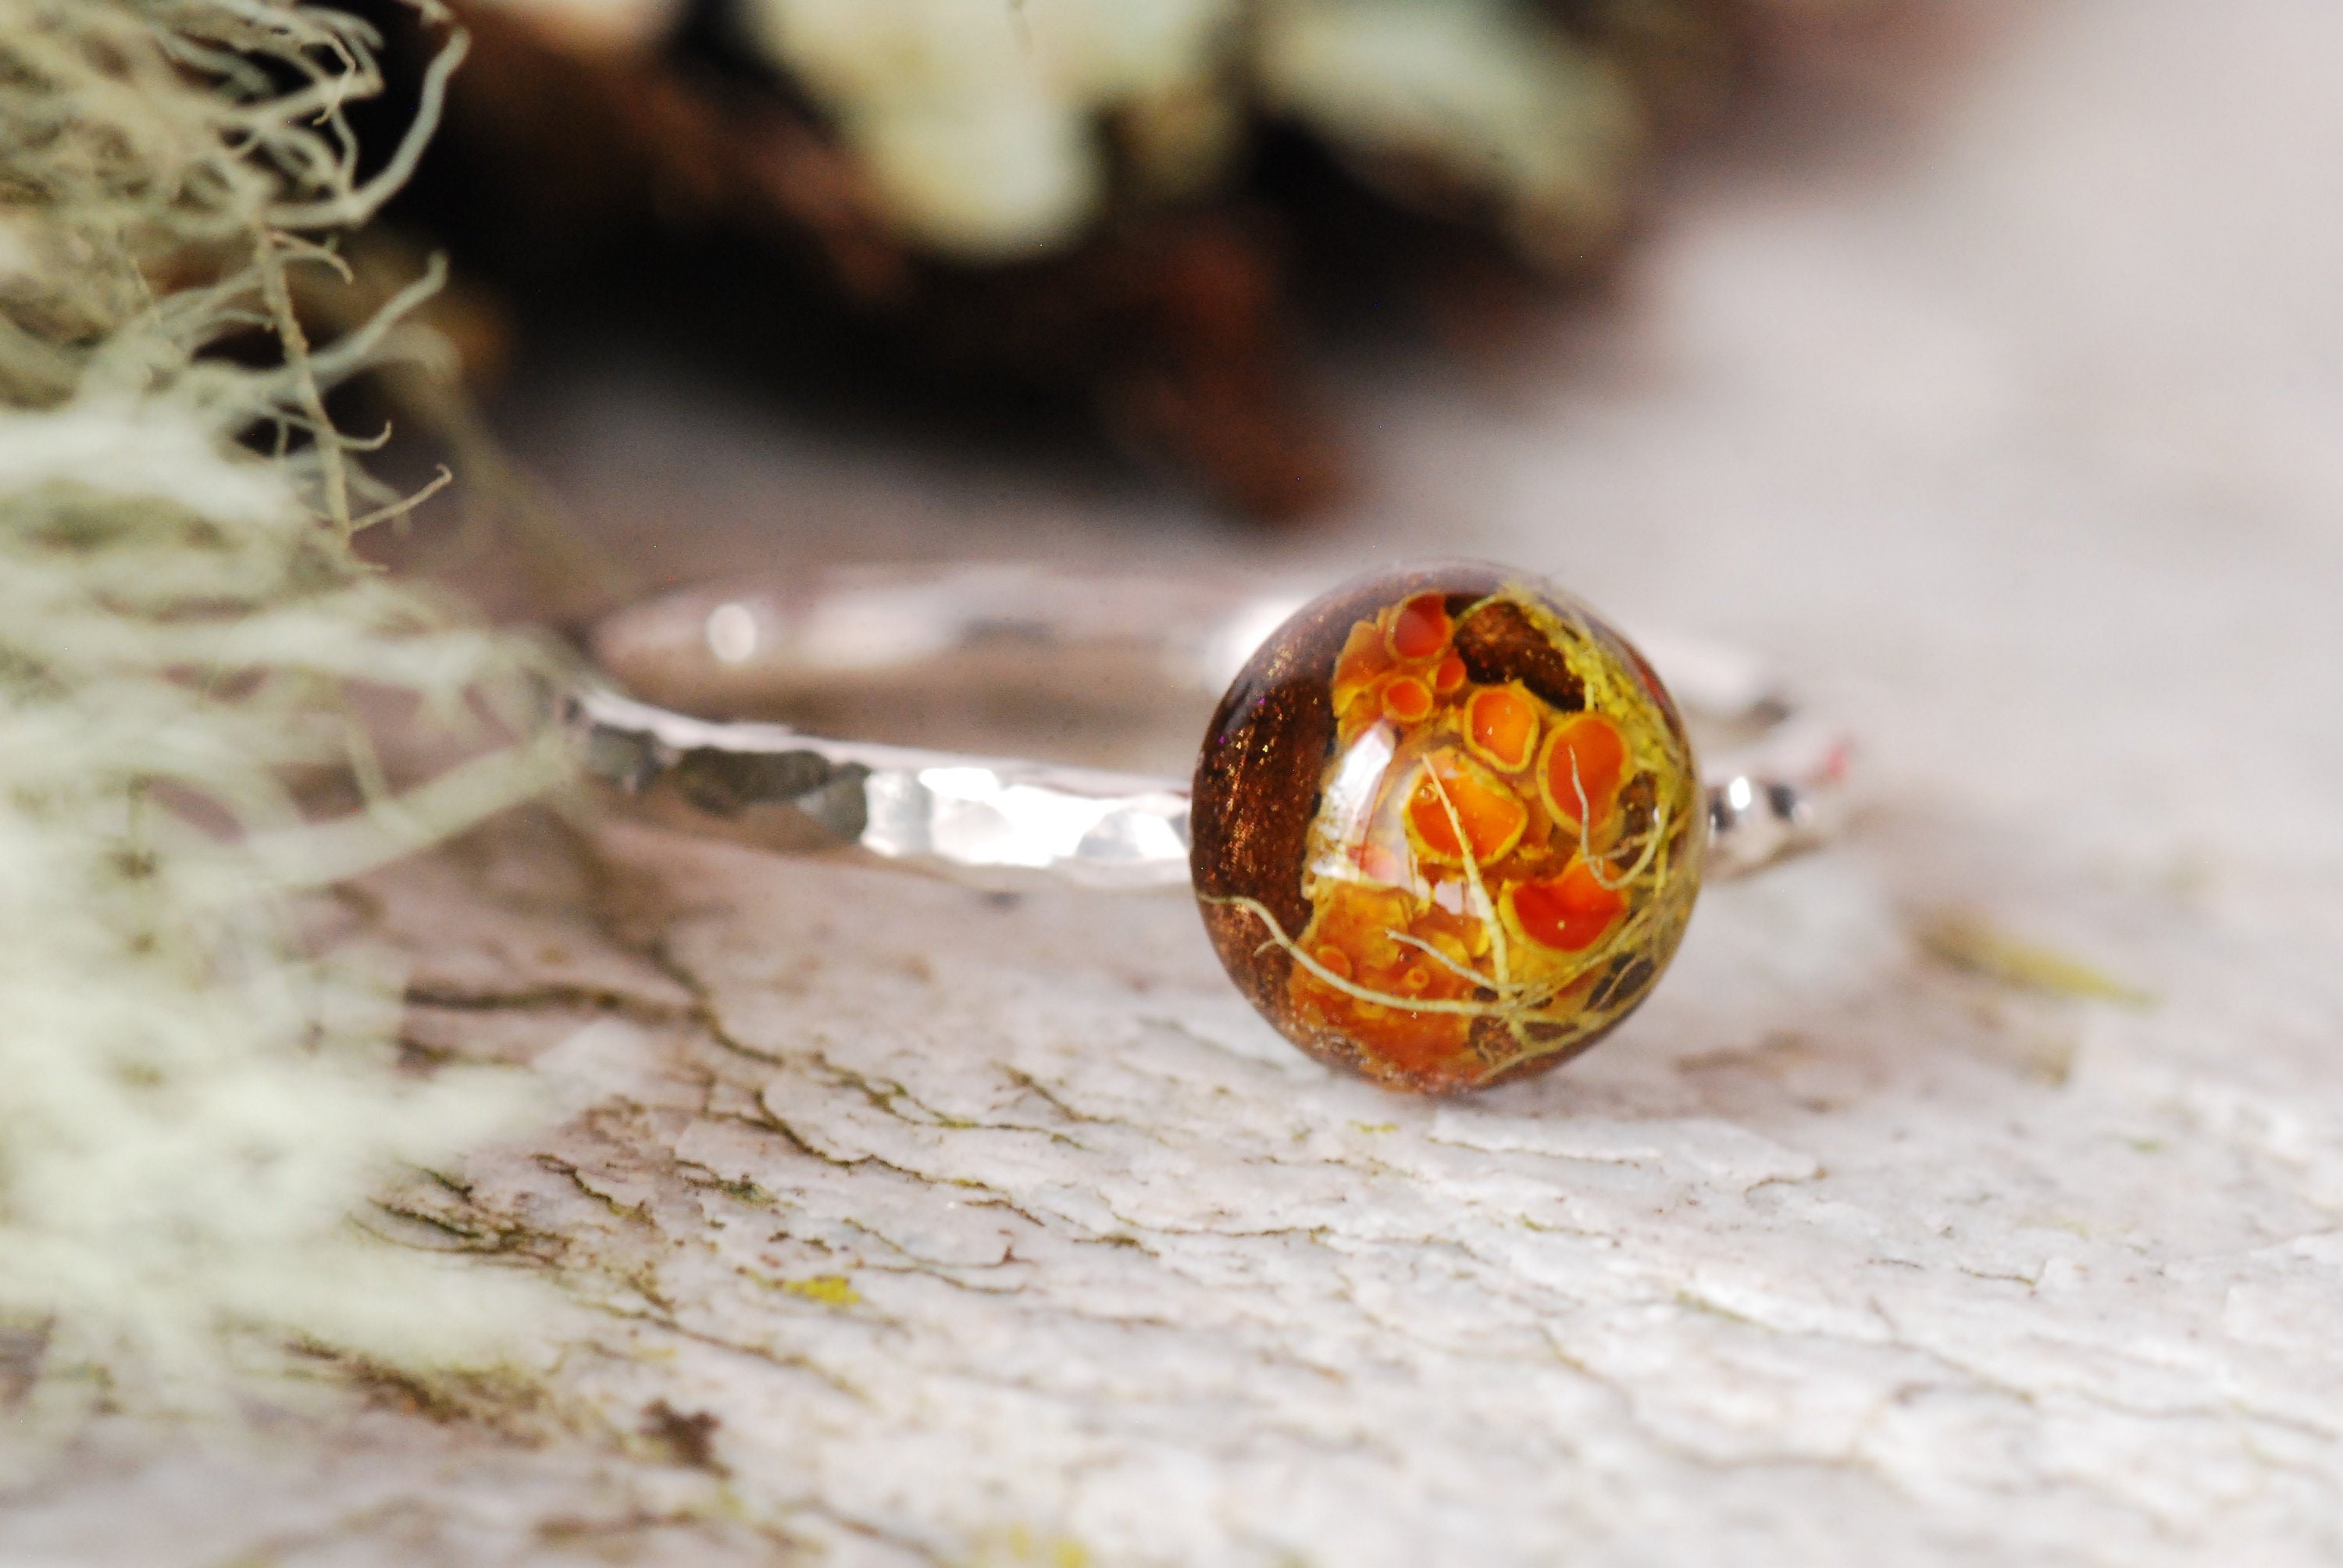 Silver Moss Ring, Lichen Nature Ring, Terrarium Sterling Silver Ring, Forest Ring, Botanical Jewelry, Rustic Resin Ring, Magic Jewelry